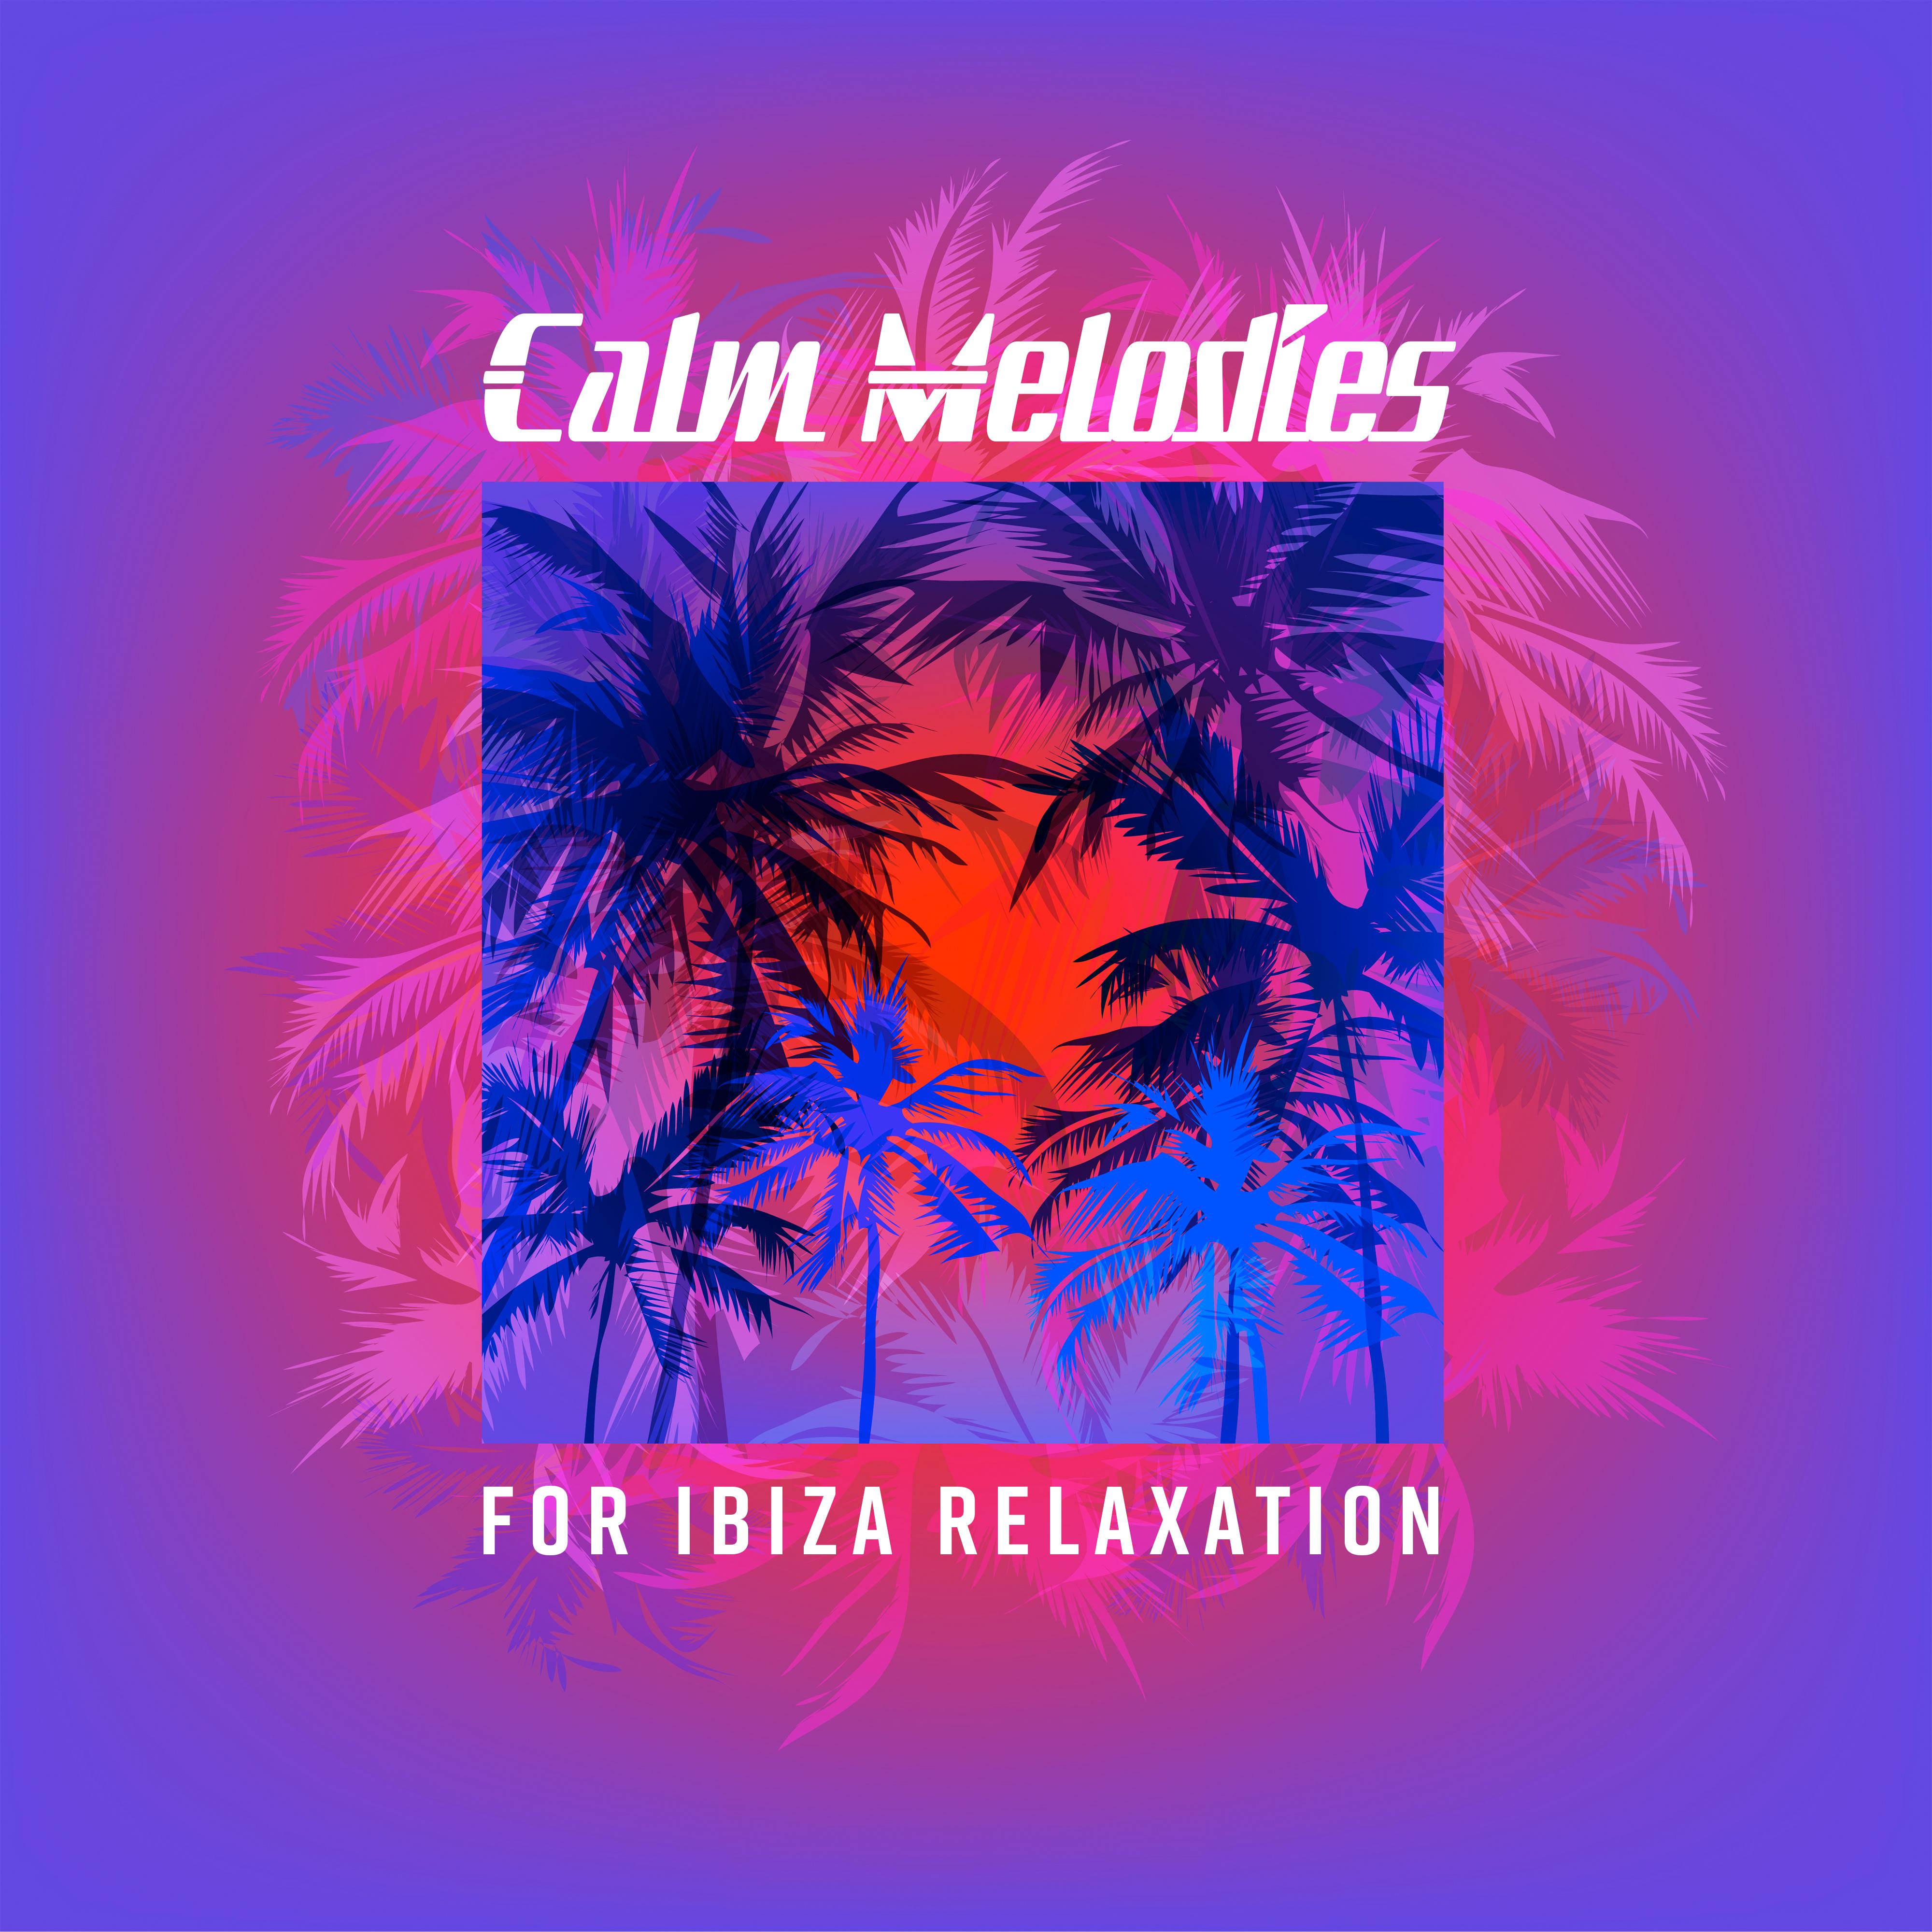 Calm Melodies for Ibiza Relaxation